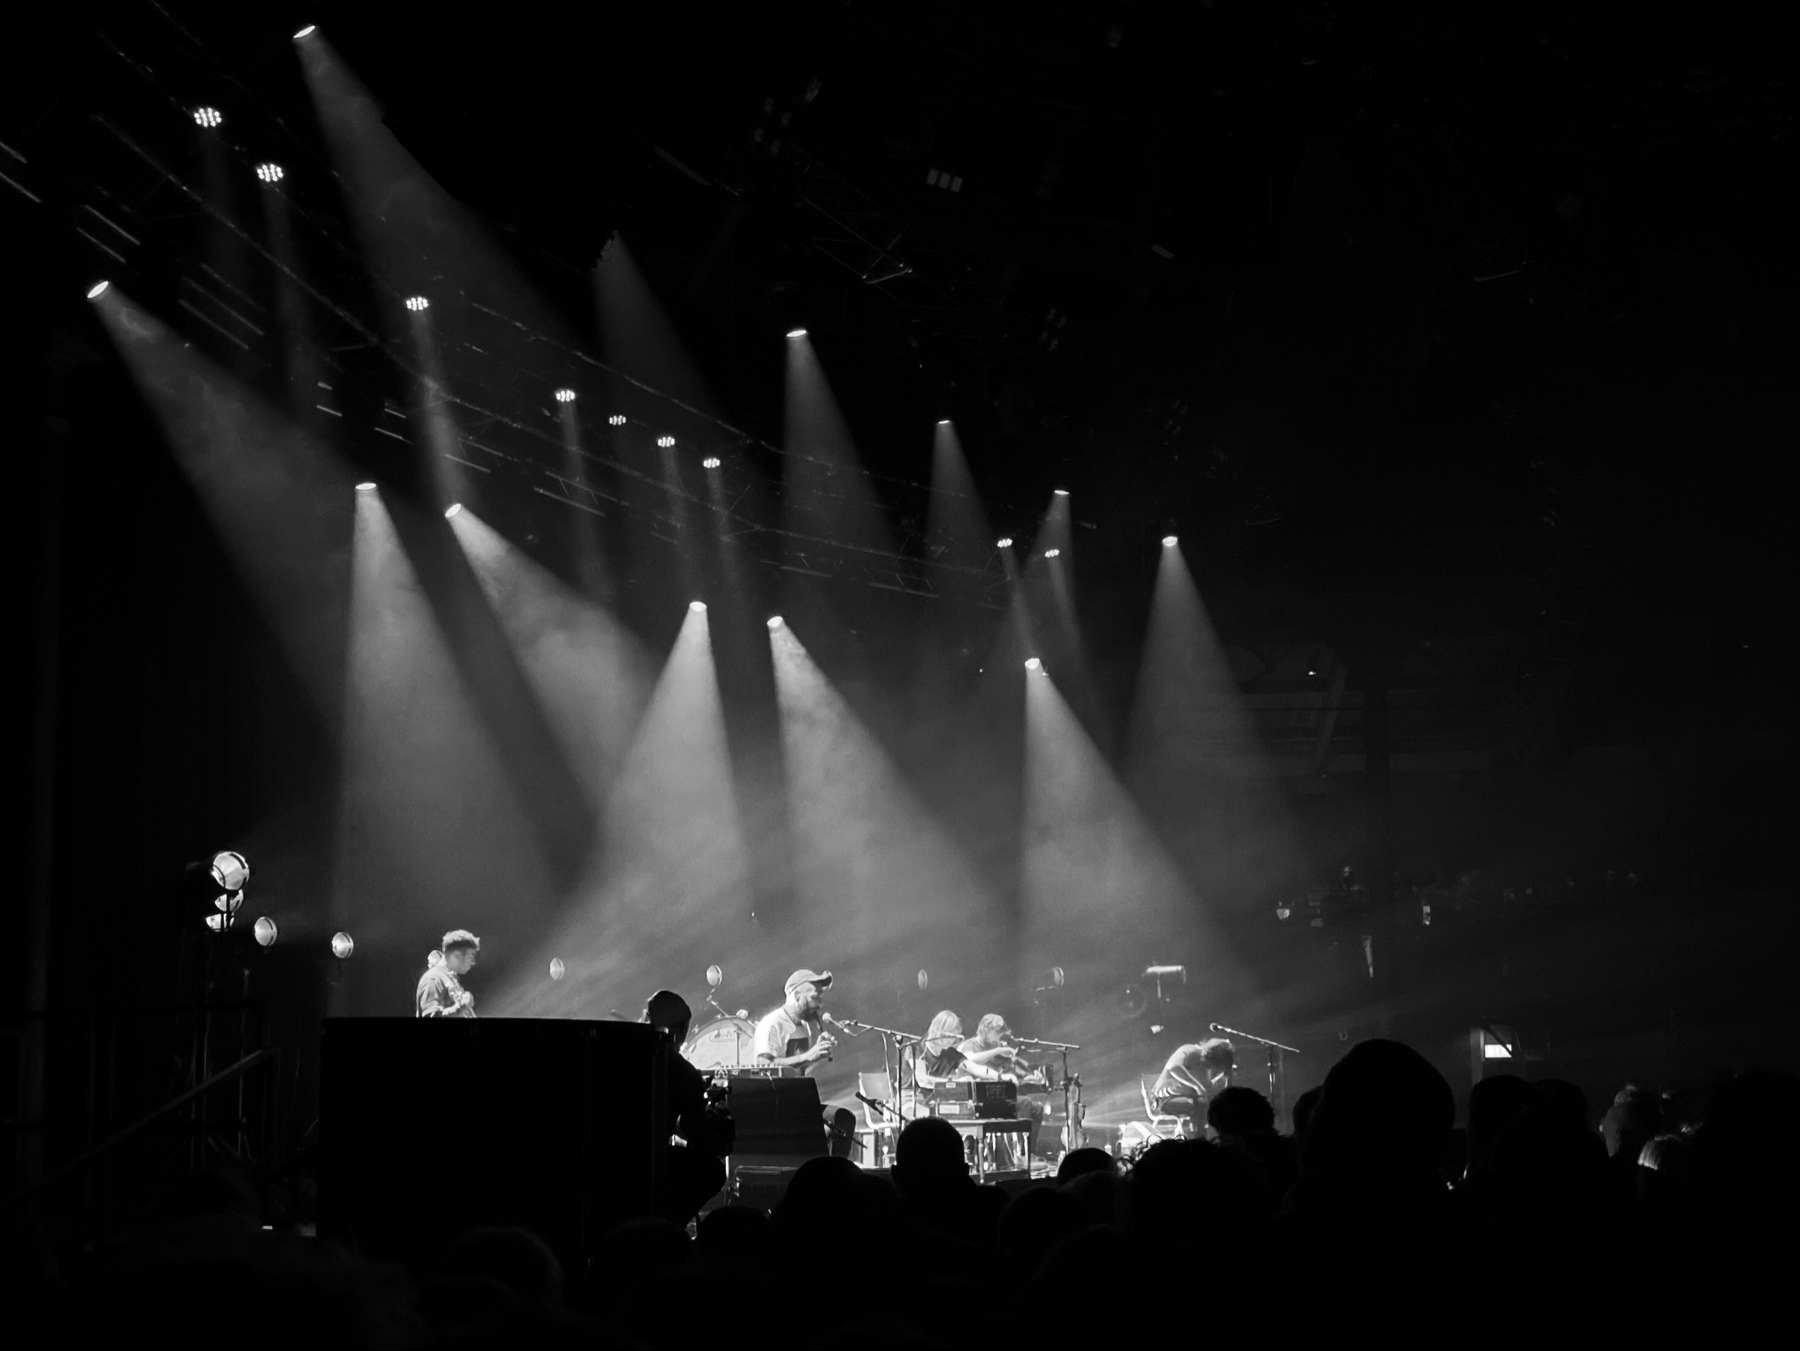 Monochrome image of musicians on stage under strong lighting